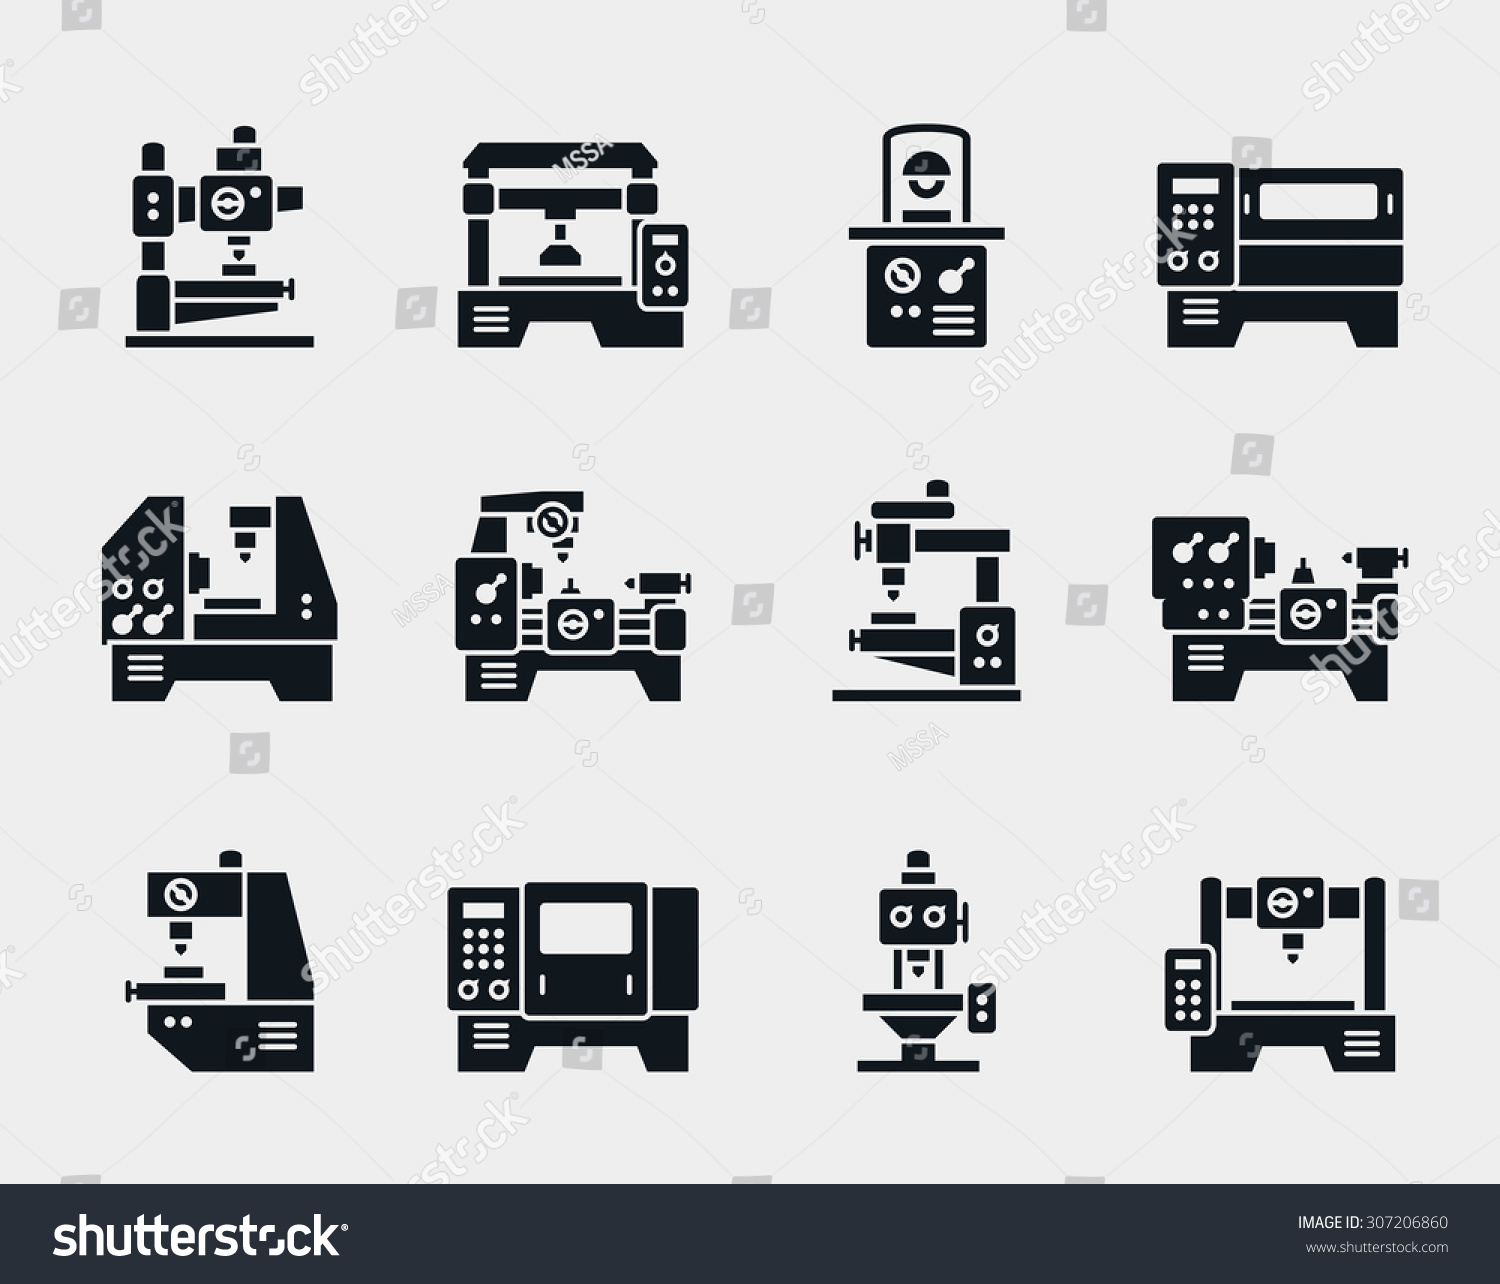 industrial technology clipart - photo #16